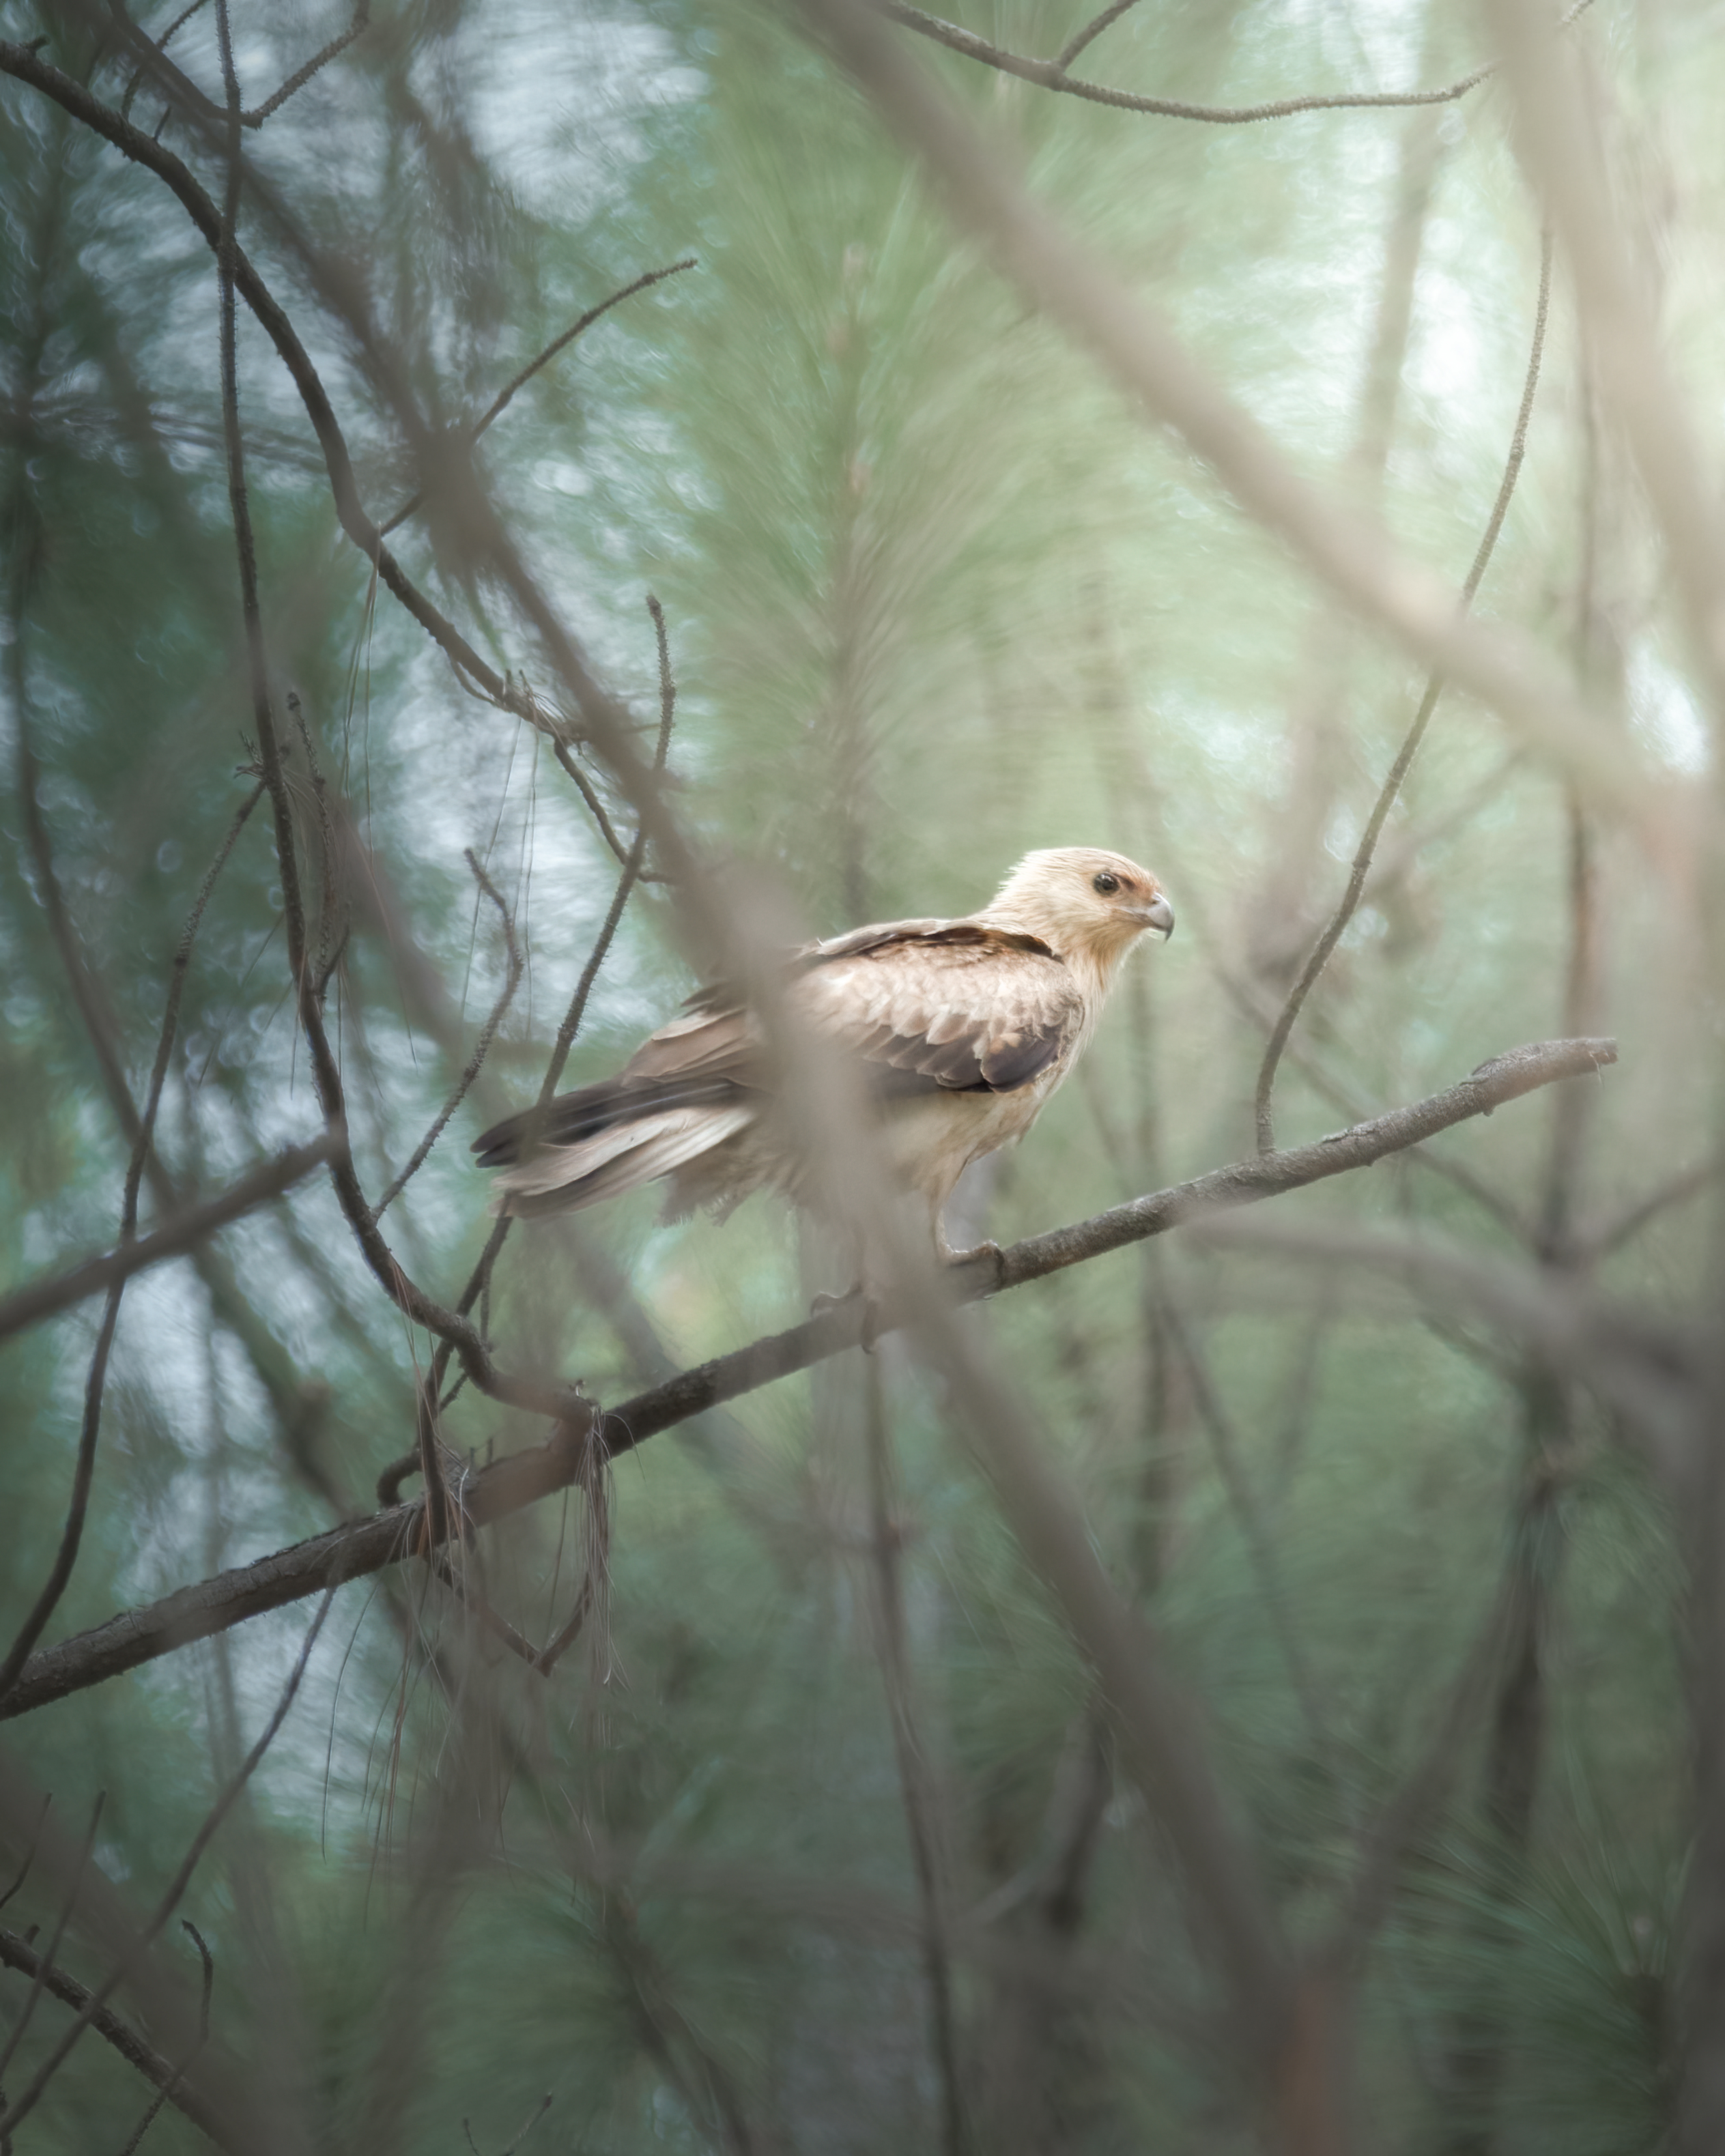 Native wildlife in HQP’s plantation or custodial native forests runner up Andres Heredia's image of a raptor in the pine